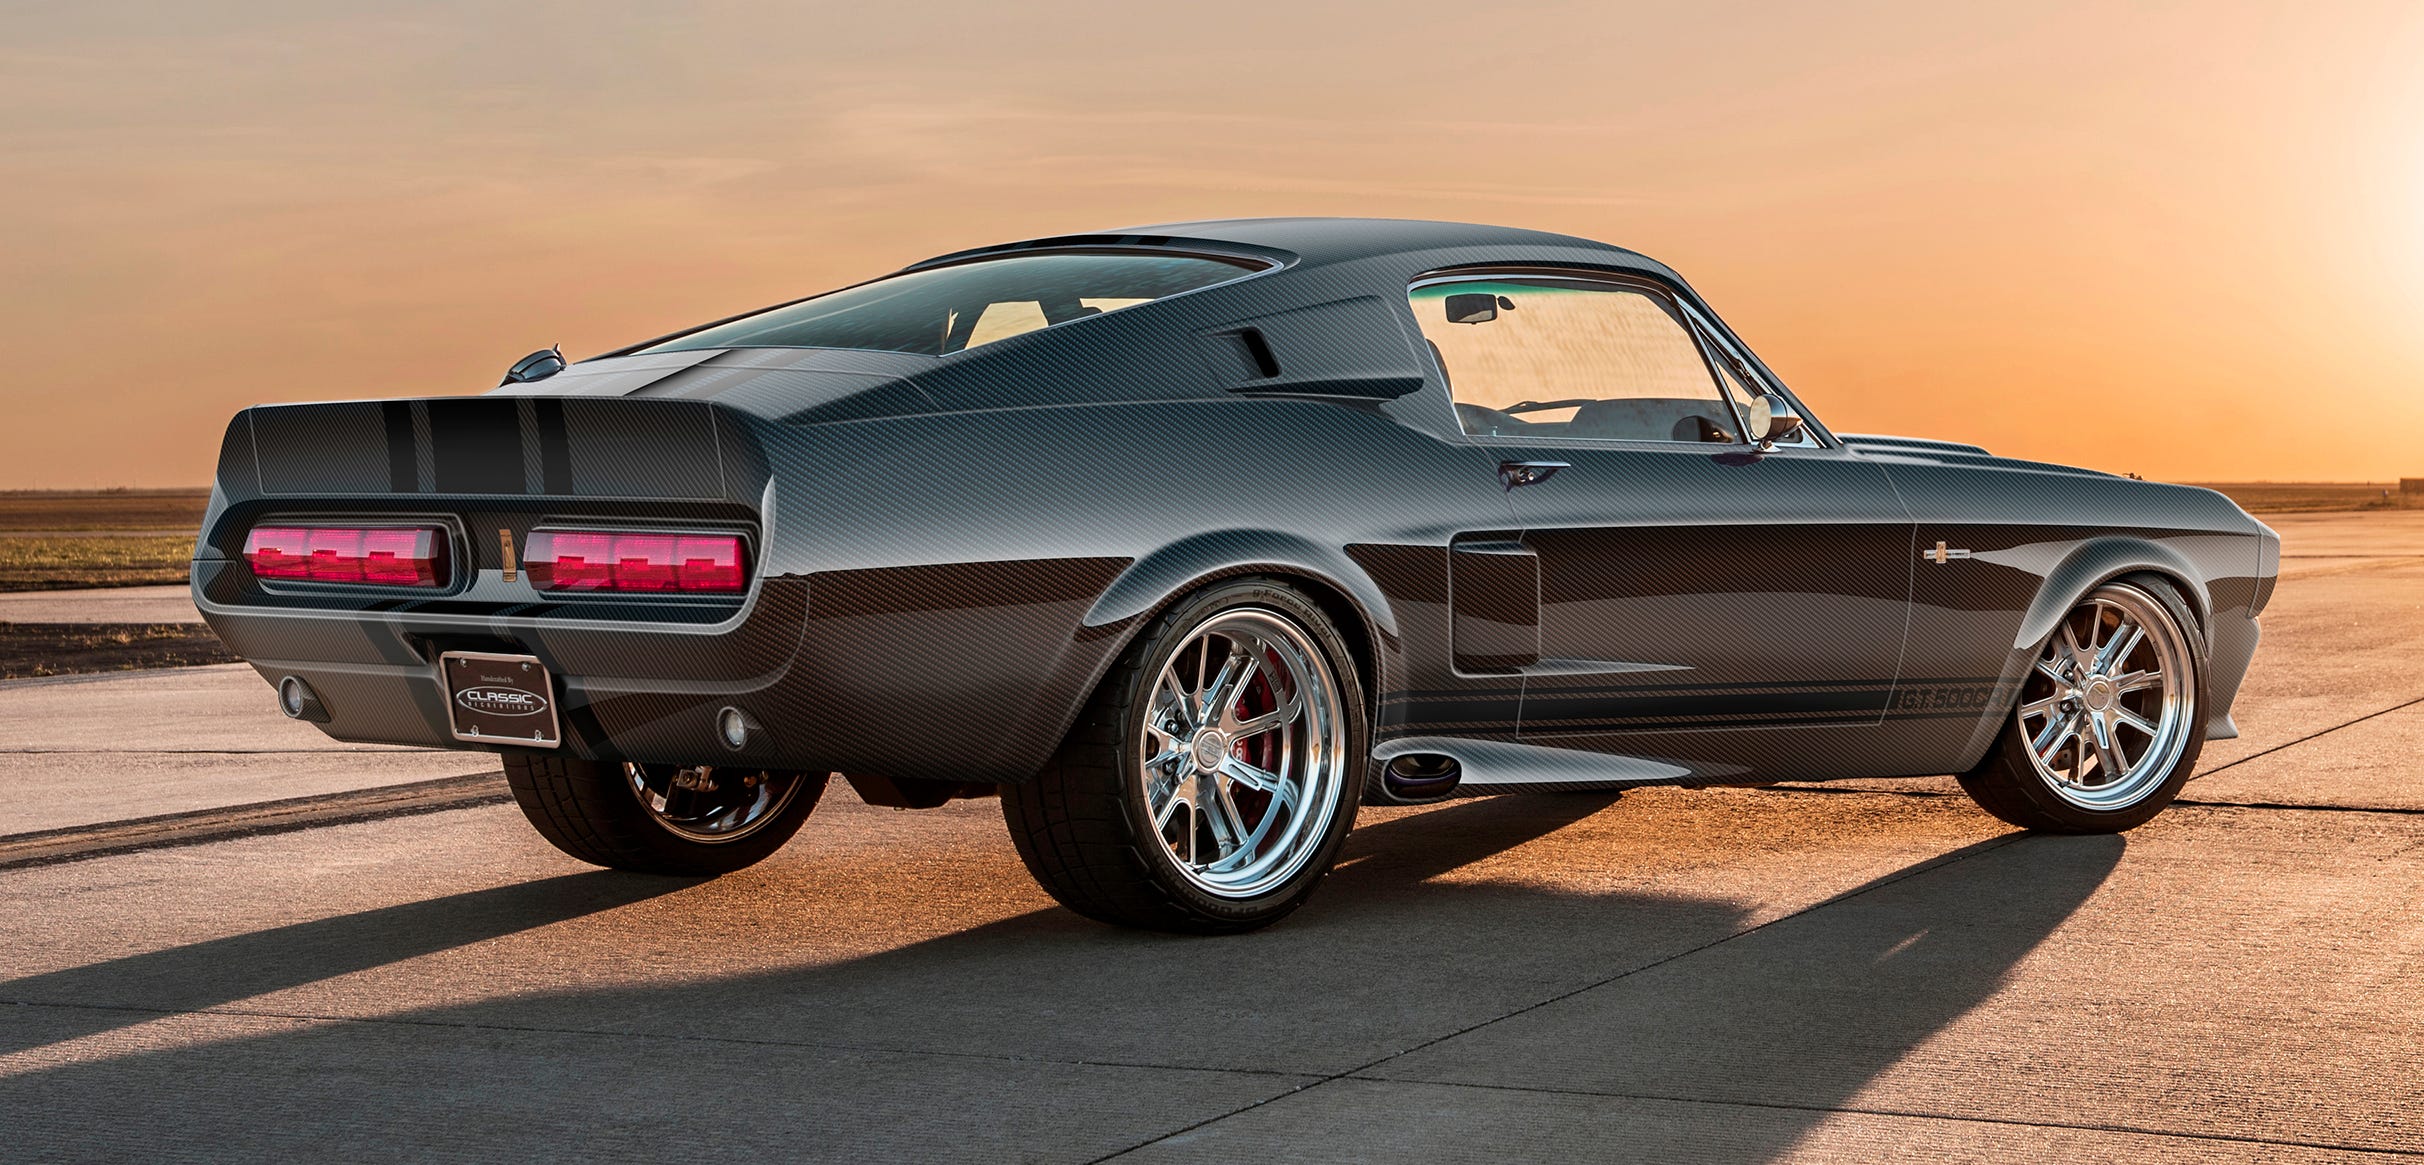 Carbon fiber Shelby GT500CR Mustang starts at $298K, made by hand